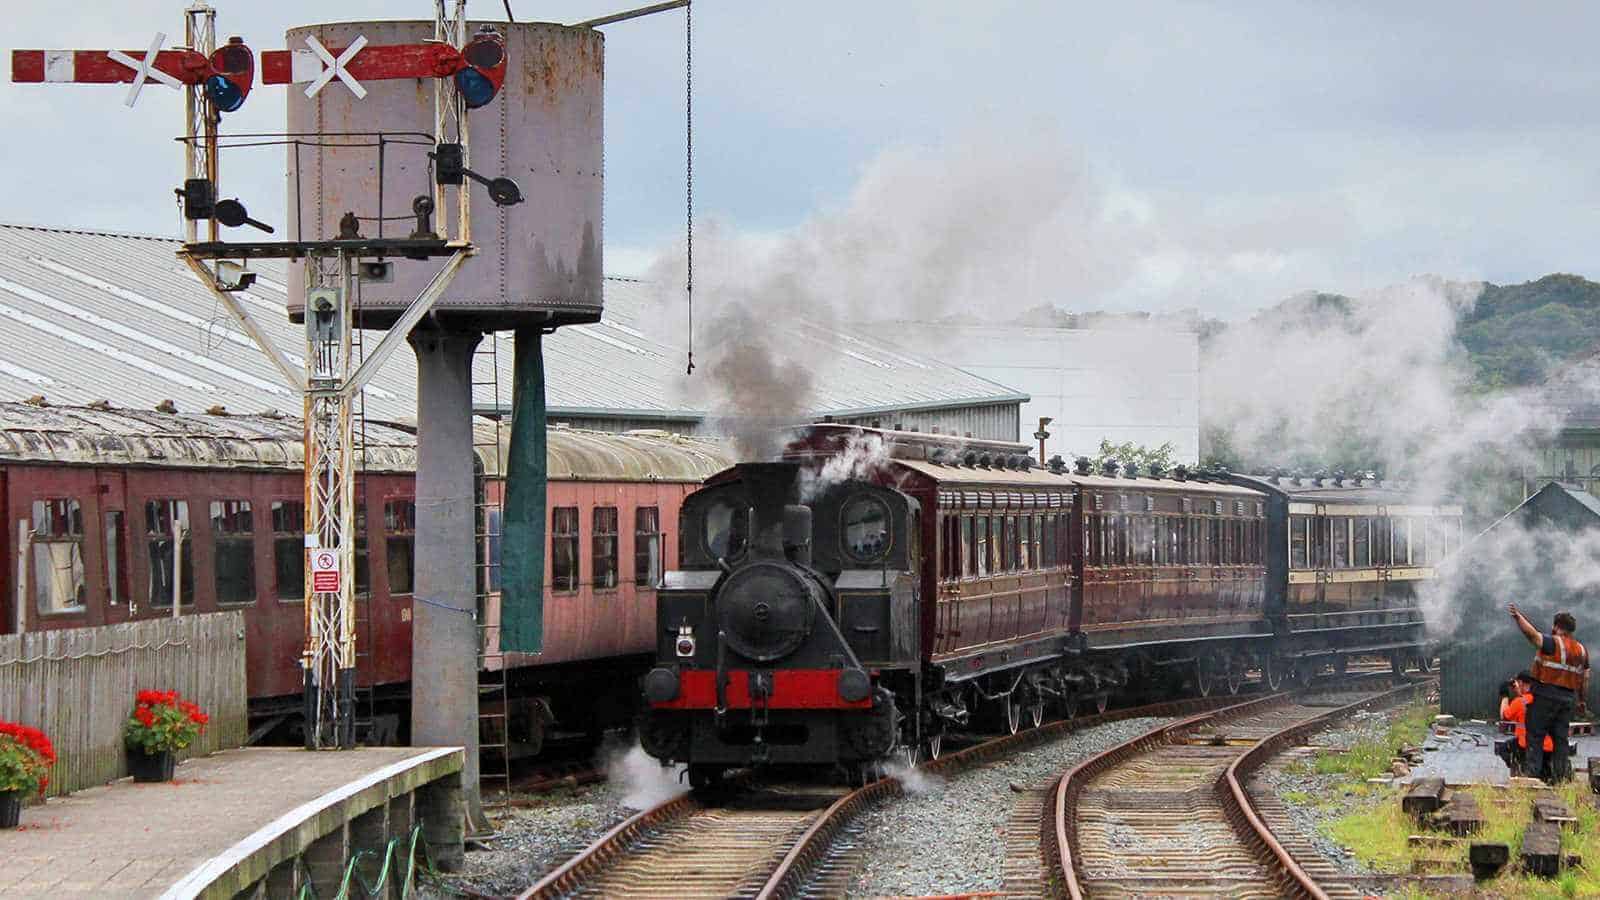 Our steam train pulls into the station in Downpatrick